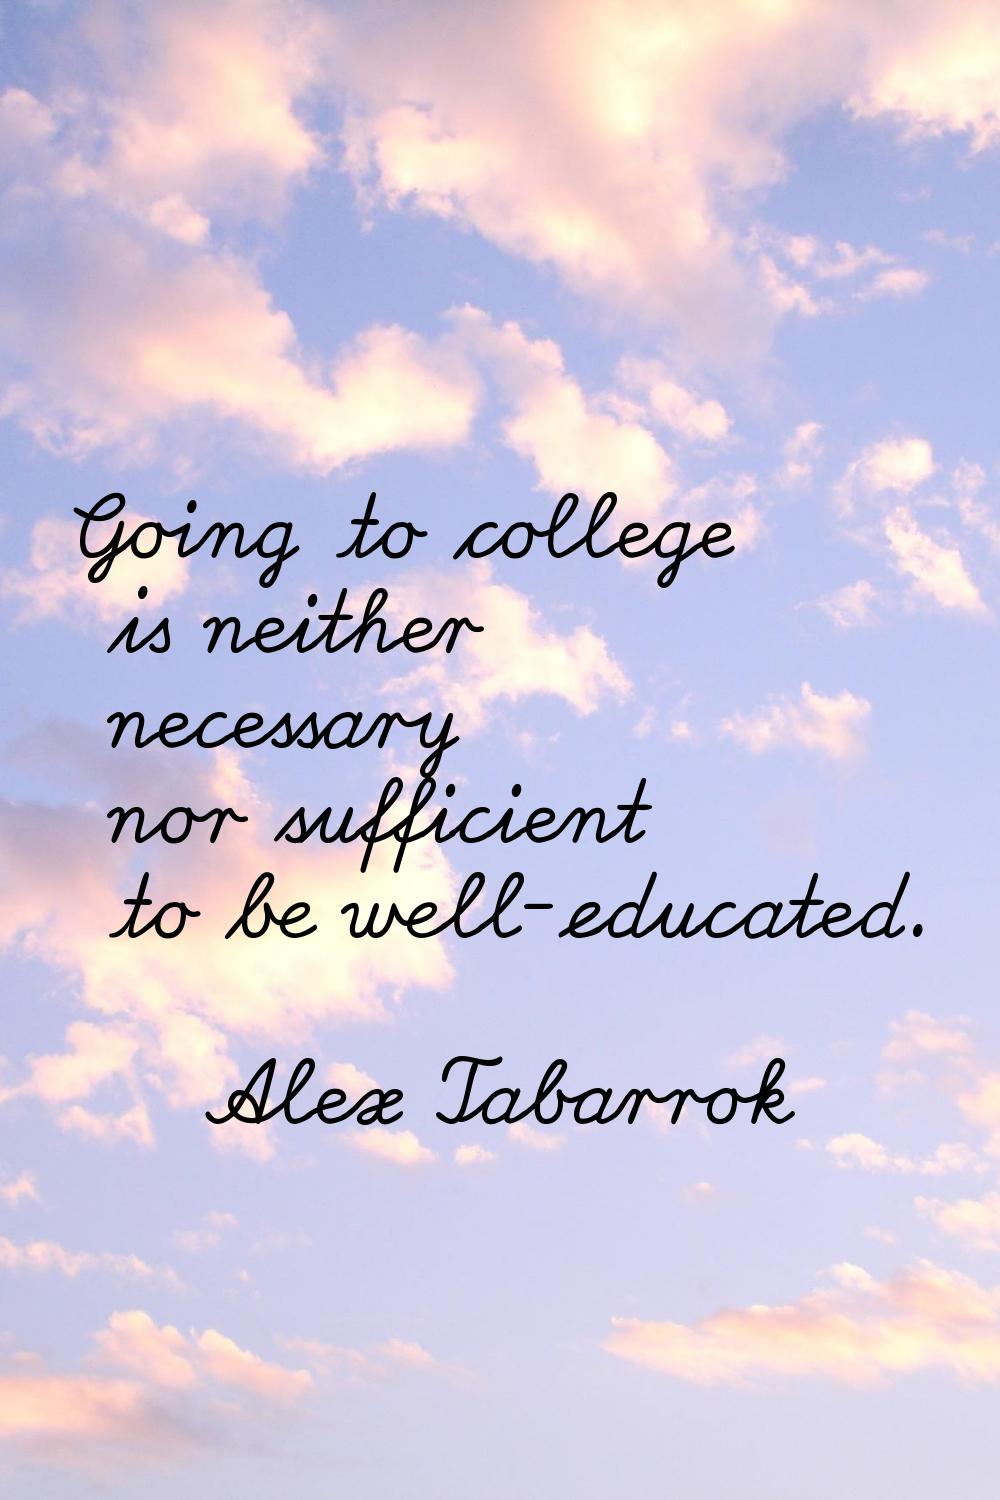 Going to college is neither necessary nor sufficient to be well-educated.